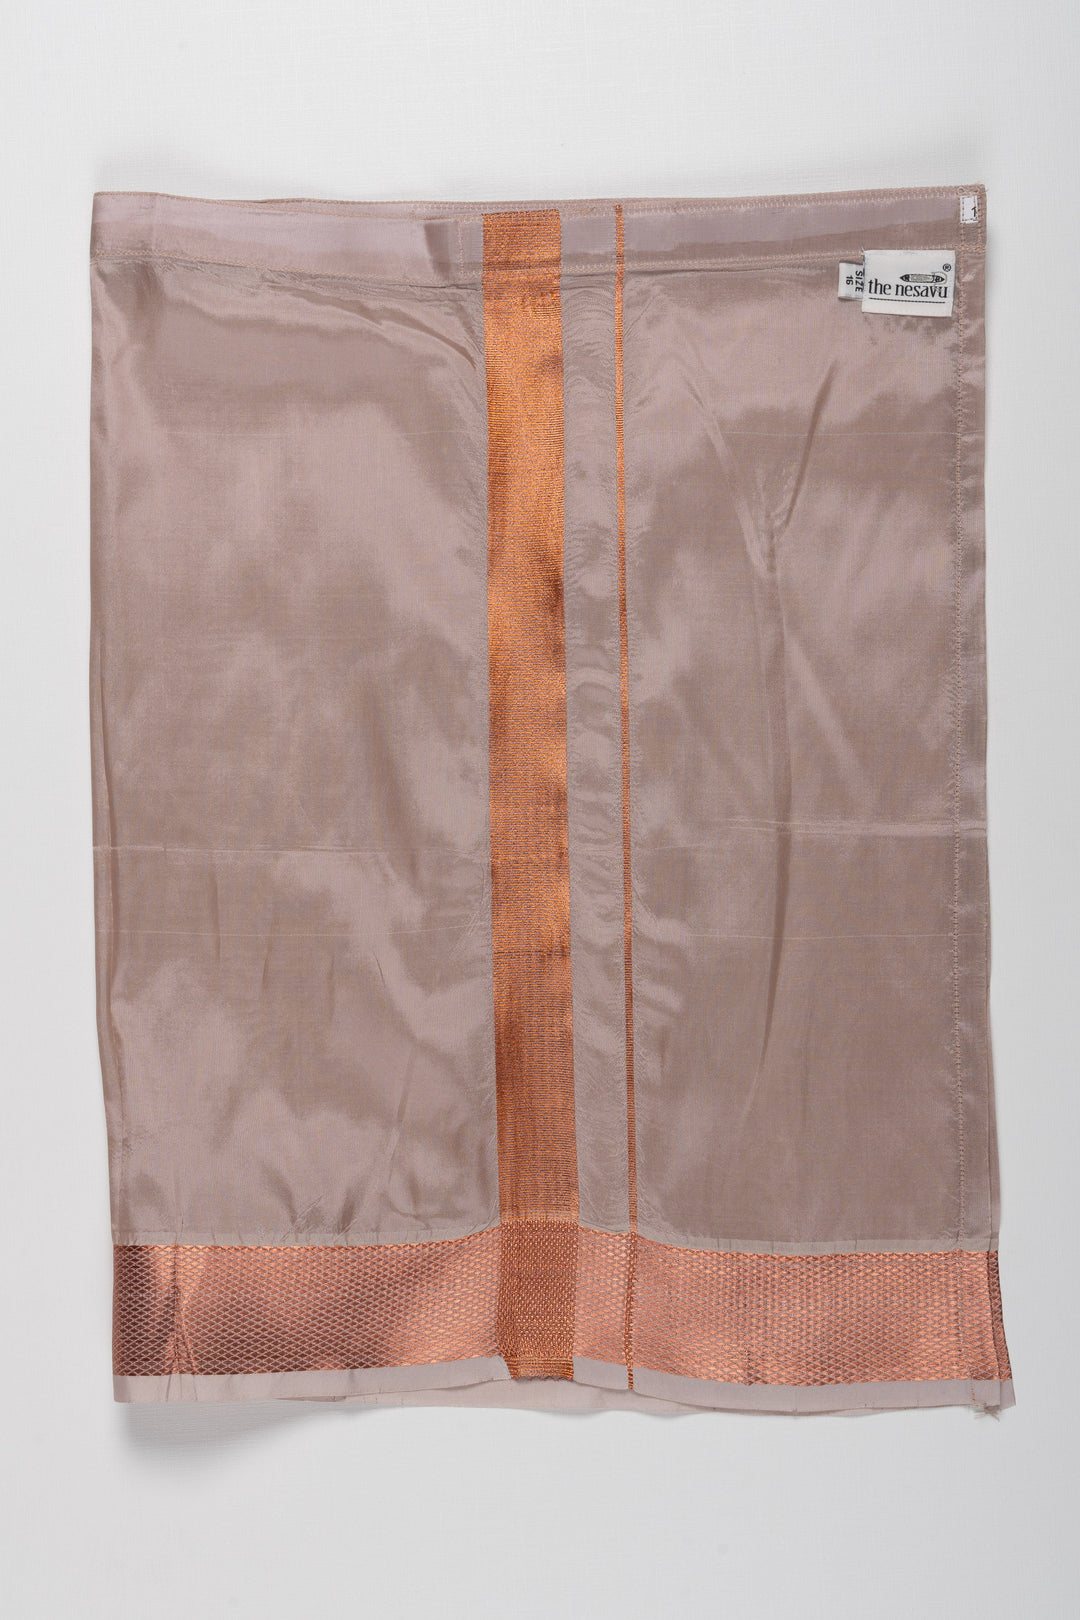 The Nesavu Boys Vesti Sophisticated Beige Silk Blend Boys Dhoti with Copper Accents Nesavu 14 (6M) / Gray / Blend Silk D009D-14 Classic Beige Boys Dhoti | Copper Detailed Traditional Wear for Special Occasions | The Nesavu